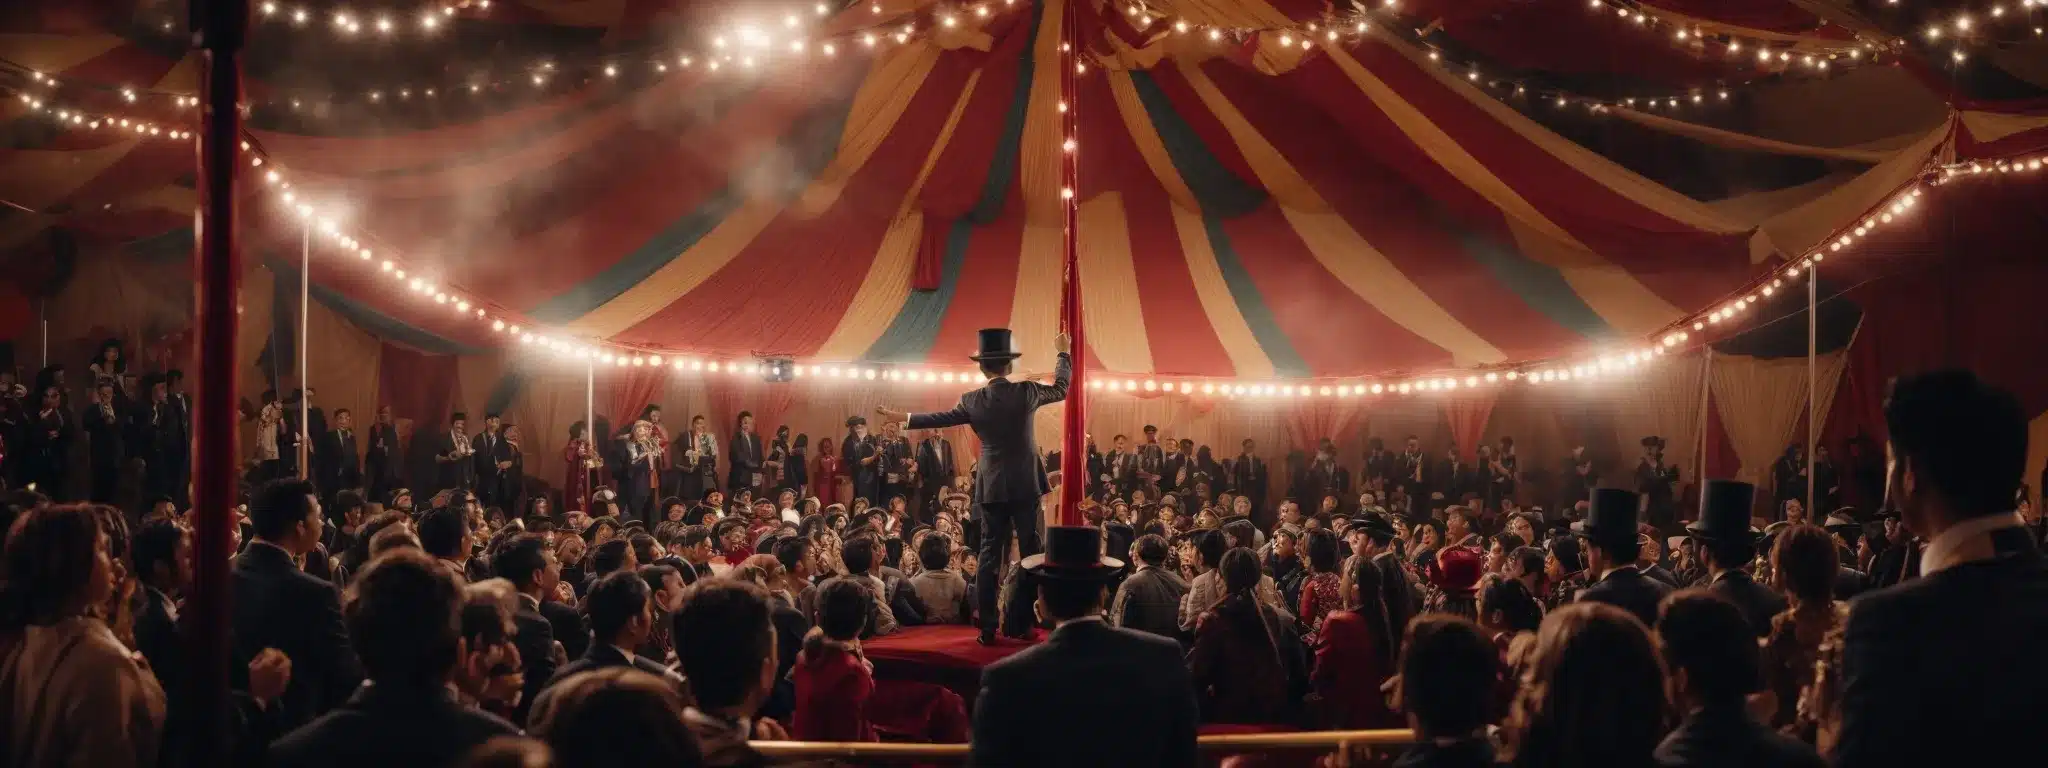 A Ringmaster Orchestrates A Captivating Circus Act Beneath The Vibrant Big Top, With Diverse Groups Of Spectators Eagerly Anticipating Their Personalized Performances.